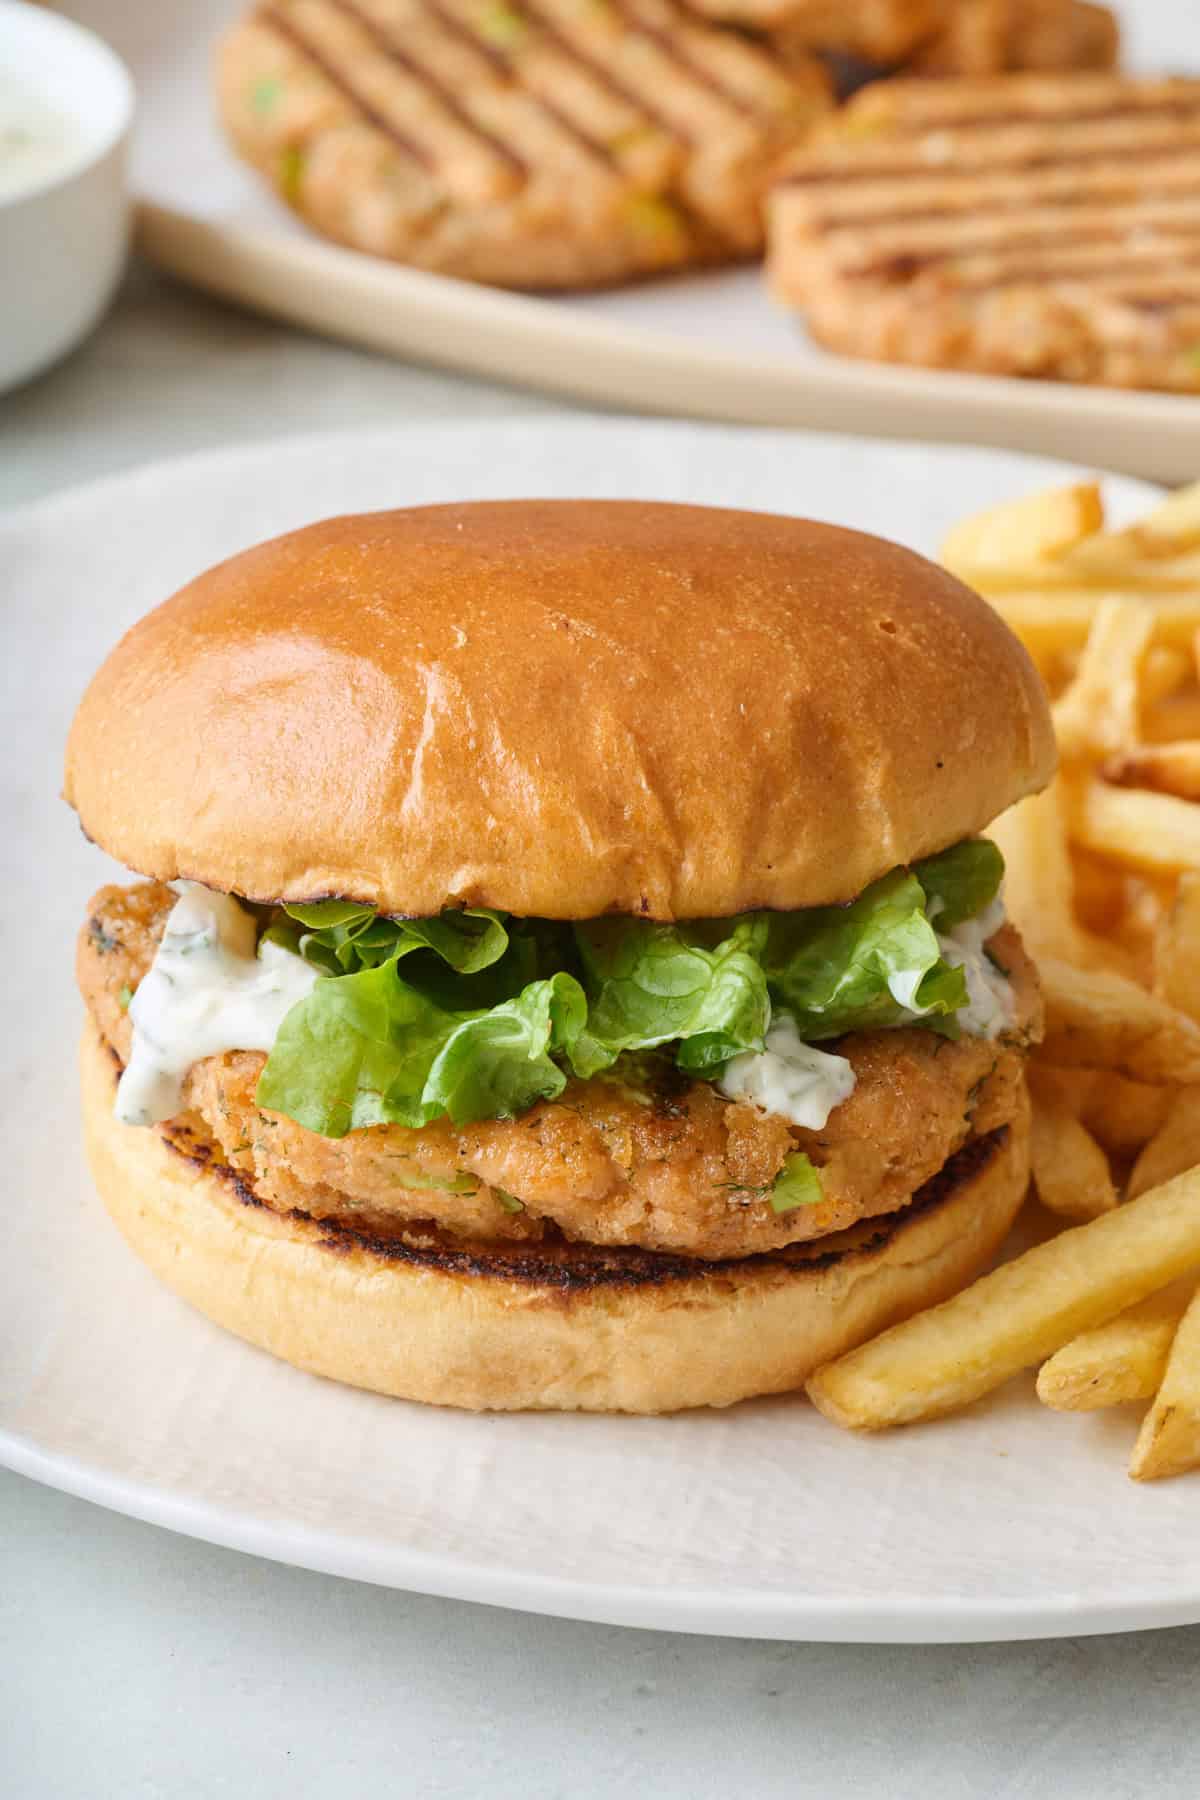 A salmon burger and french fries on a plate.